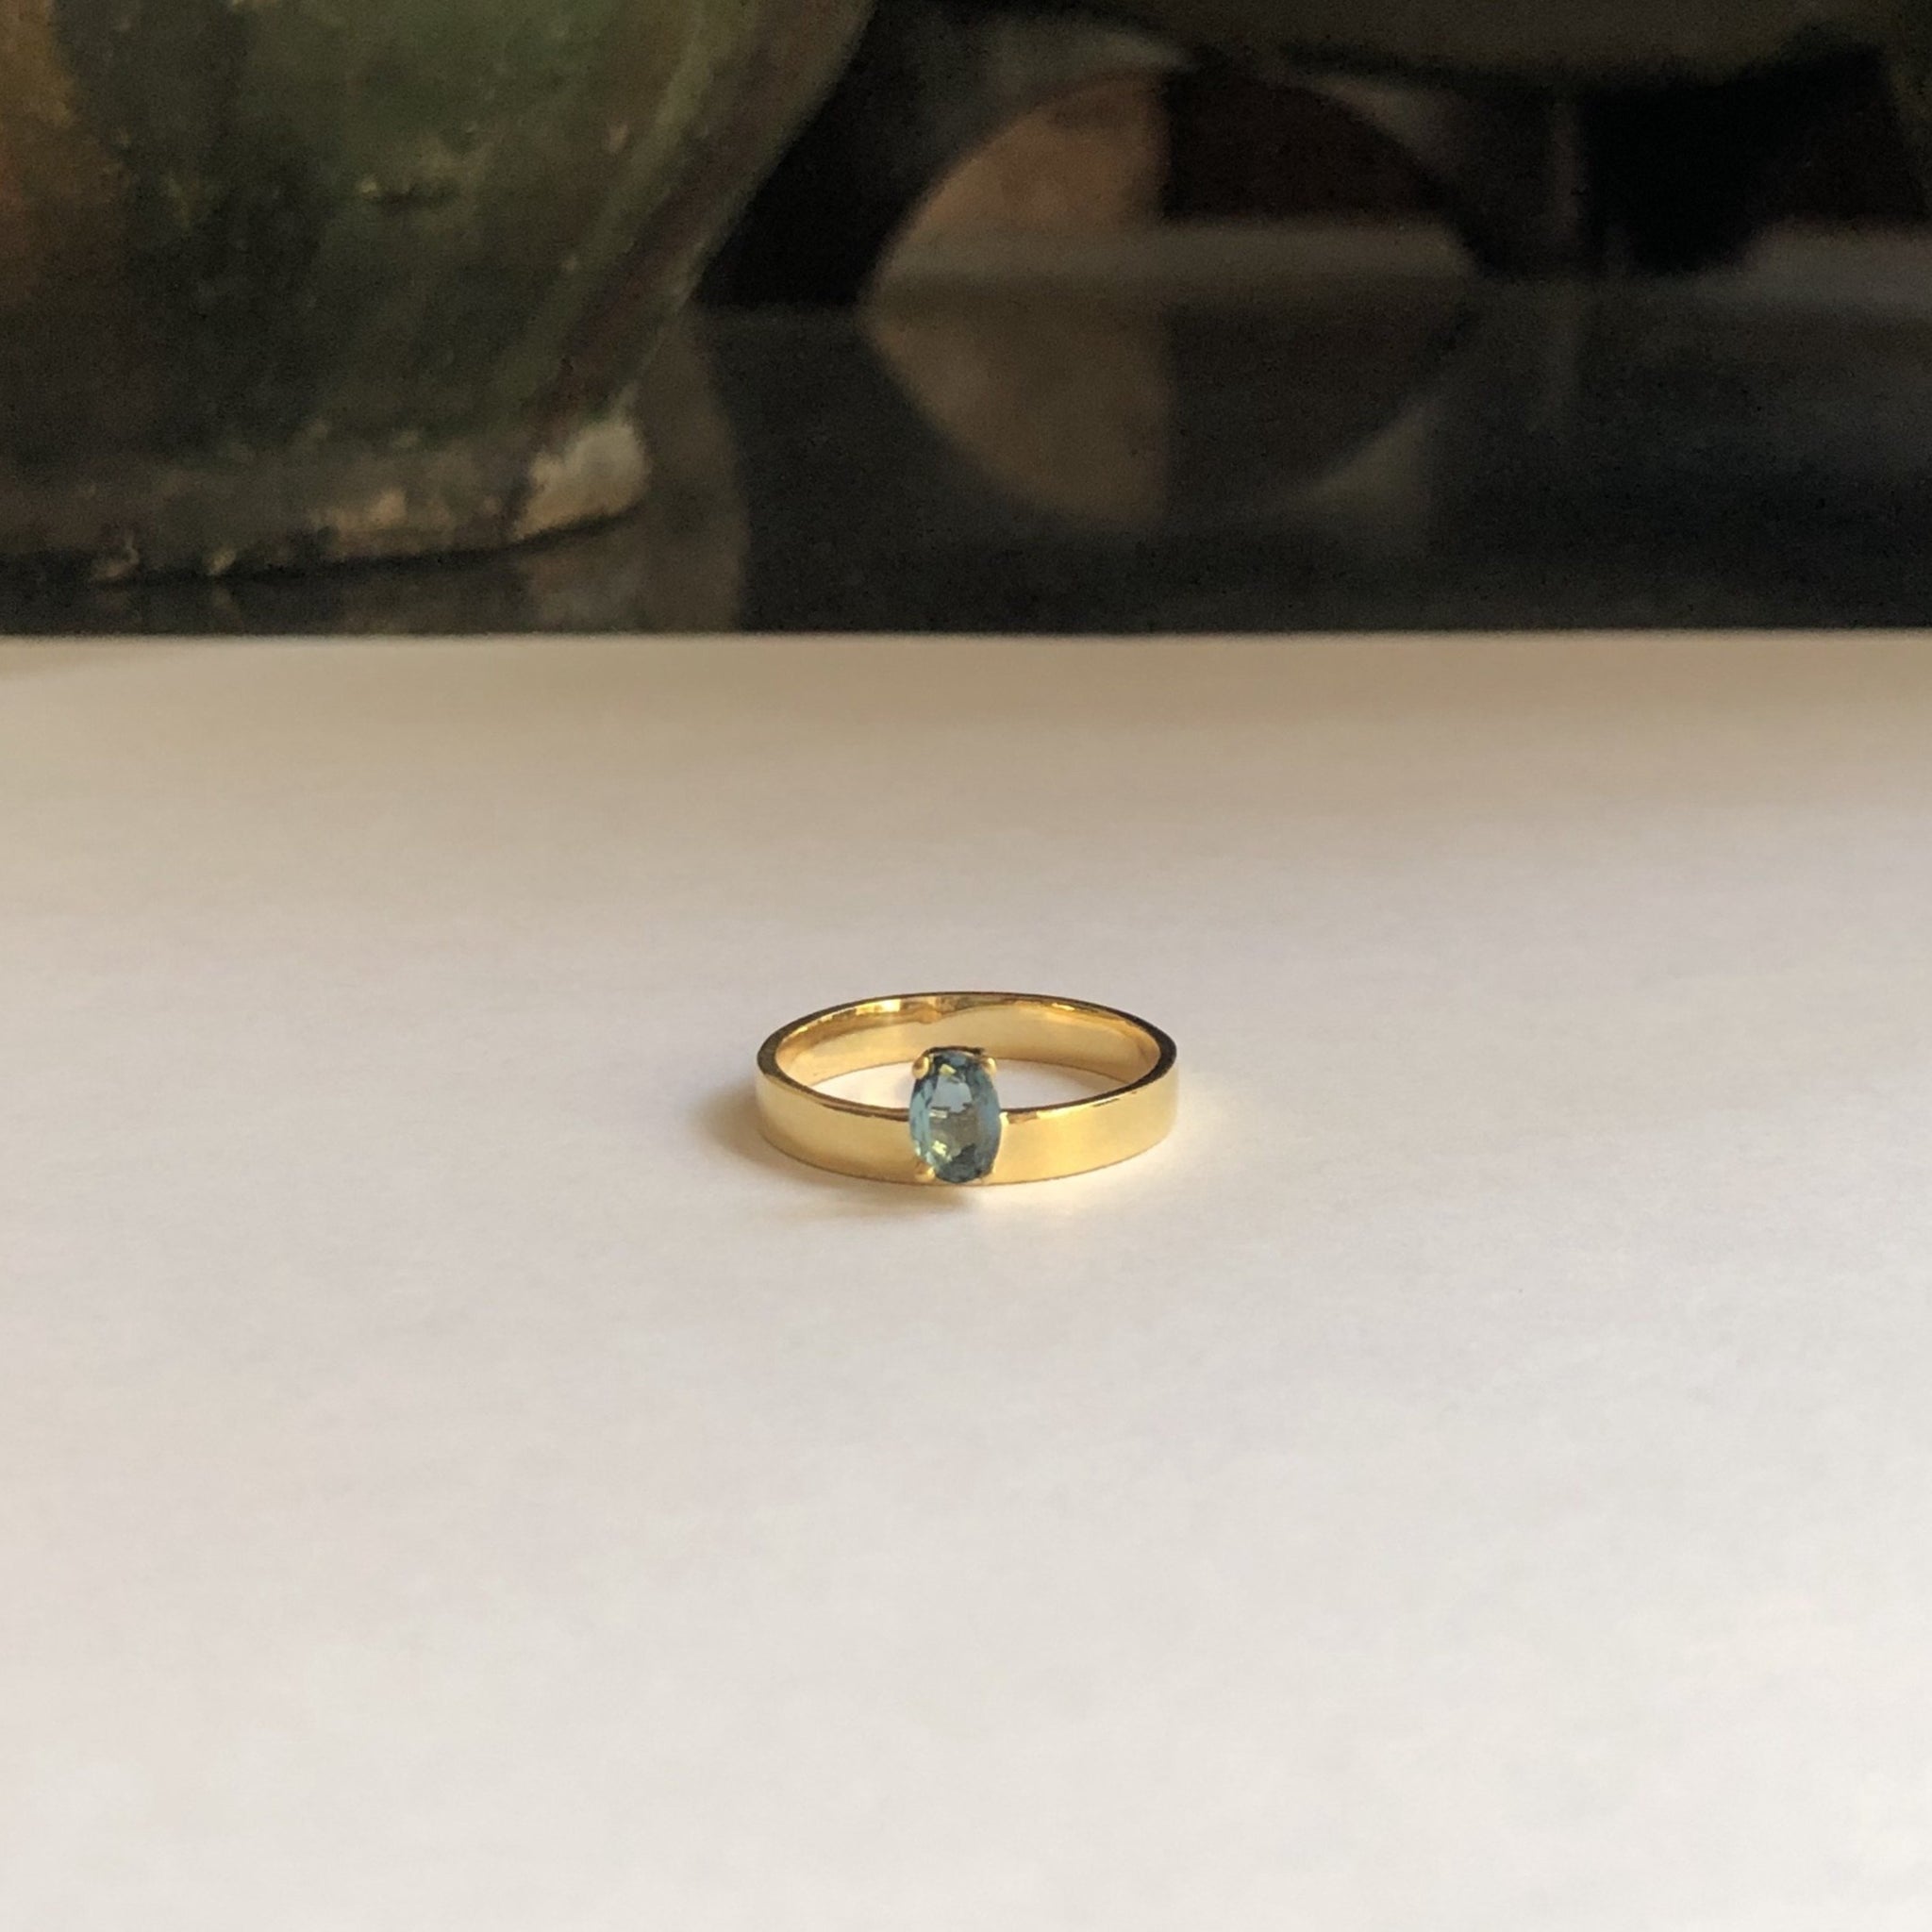 Band Ring with Oval Indicolite Tourmaline, Solid 14k Gold | ONE-OF-A-KIND